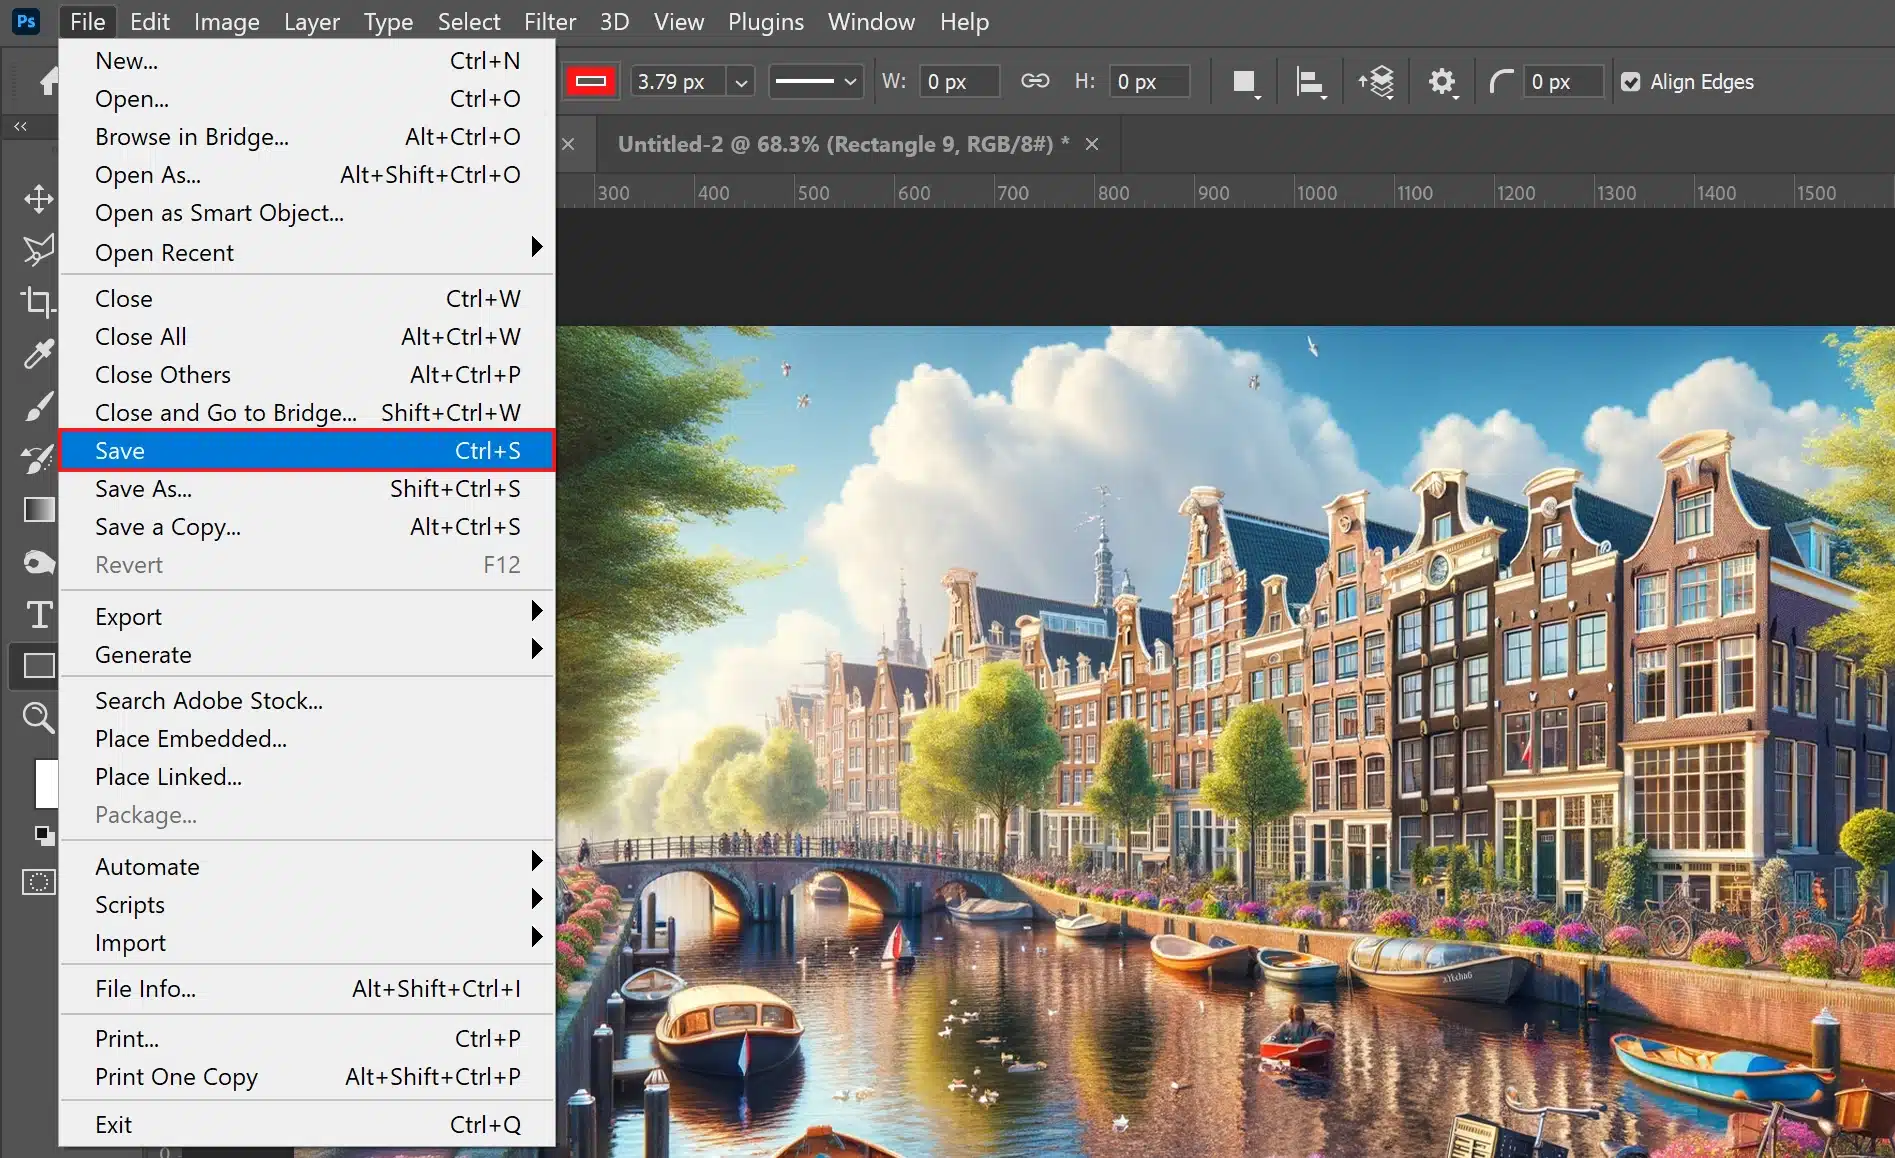 A Photoshop interface on a computer screen with the 'Save' command highlighted, showing an edited, vibrant image of Amsterdam's canal, historic buildings, and lush floral decorations.